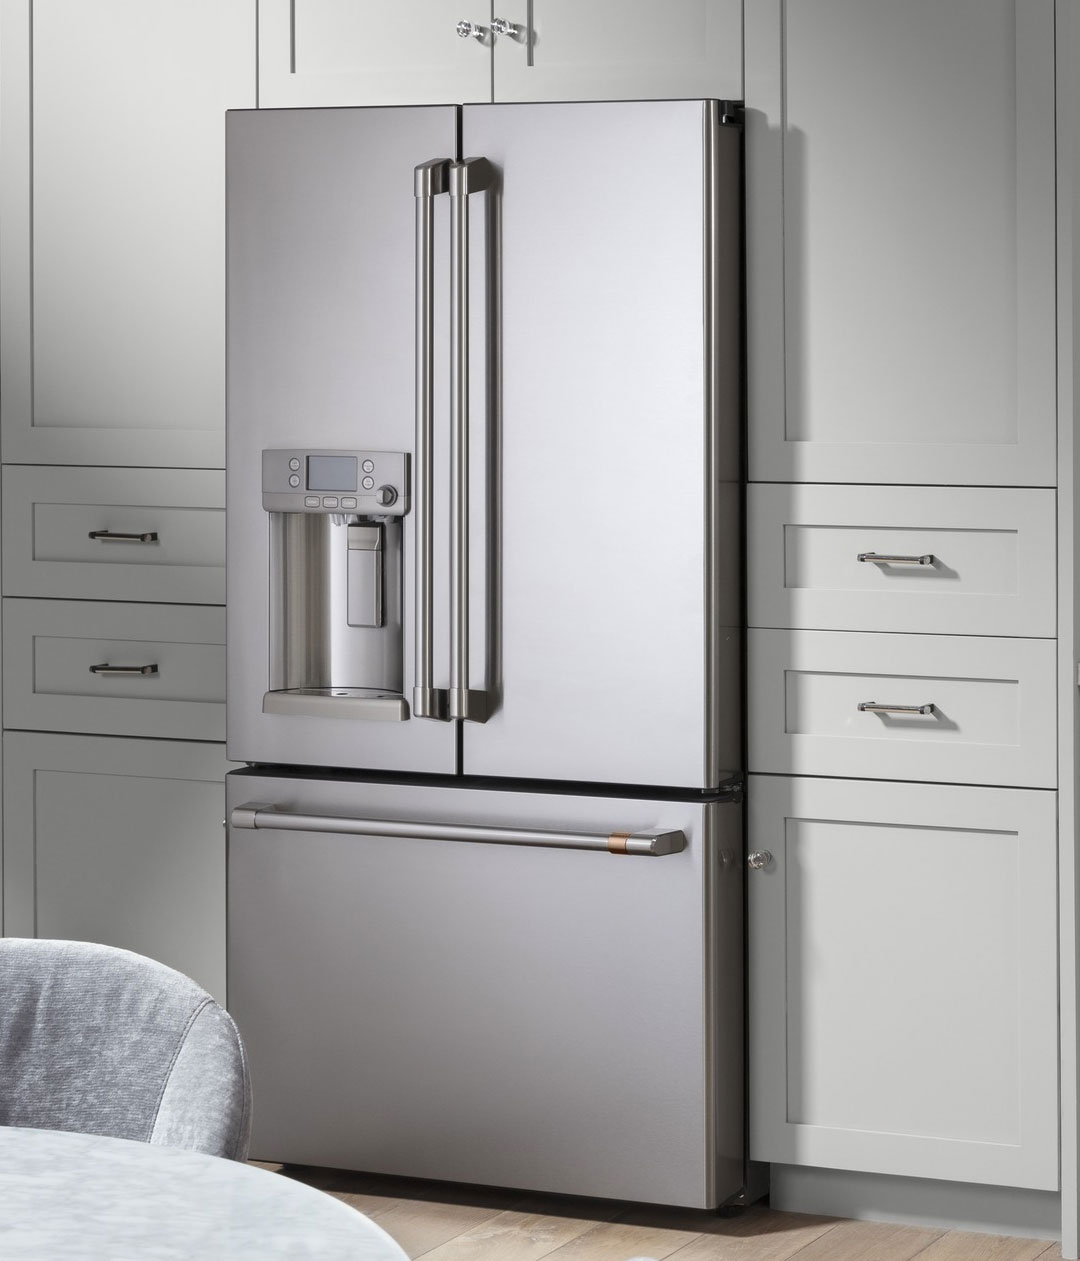 stainless steel refrigerator with grey cabinets